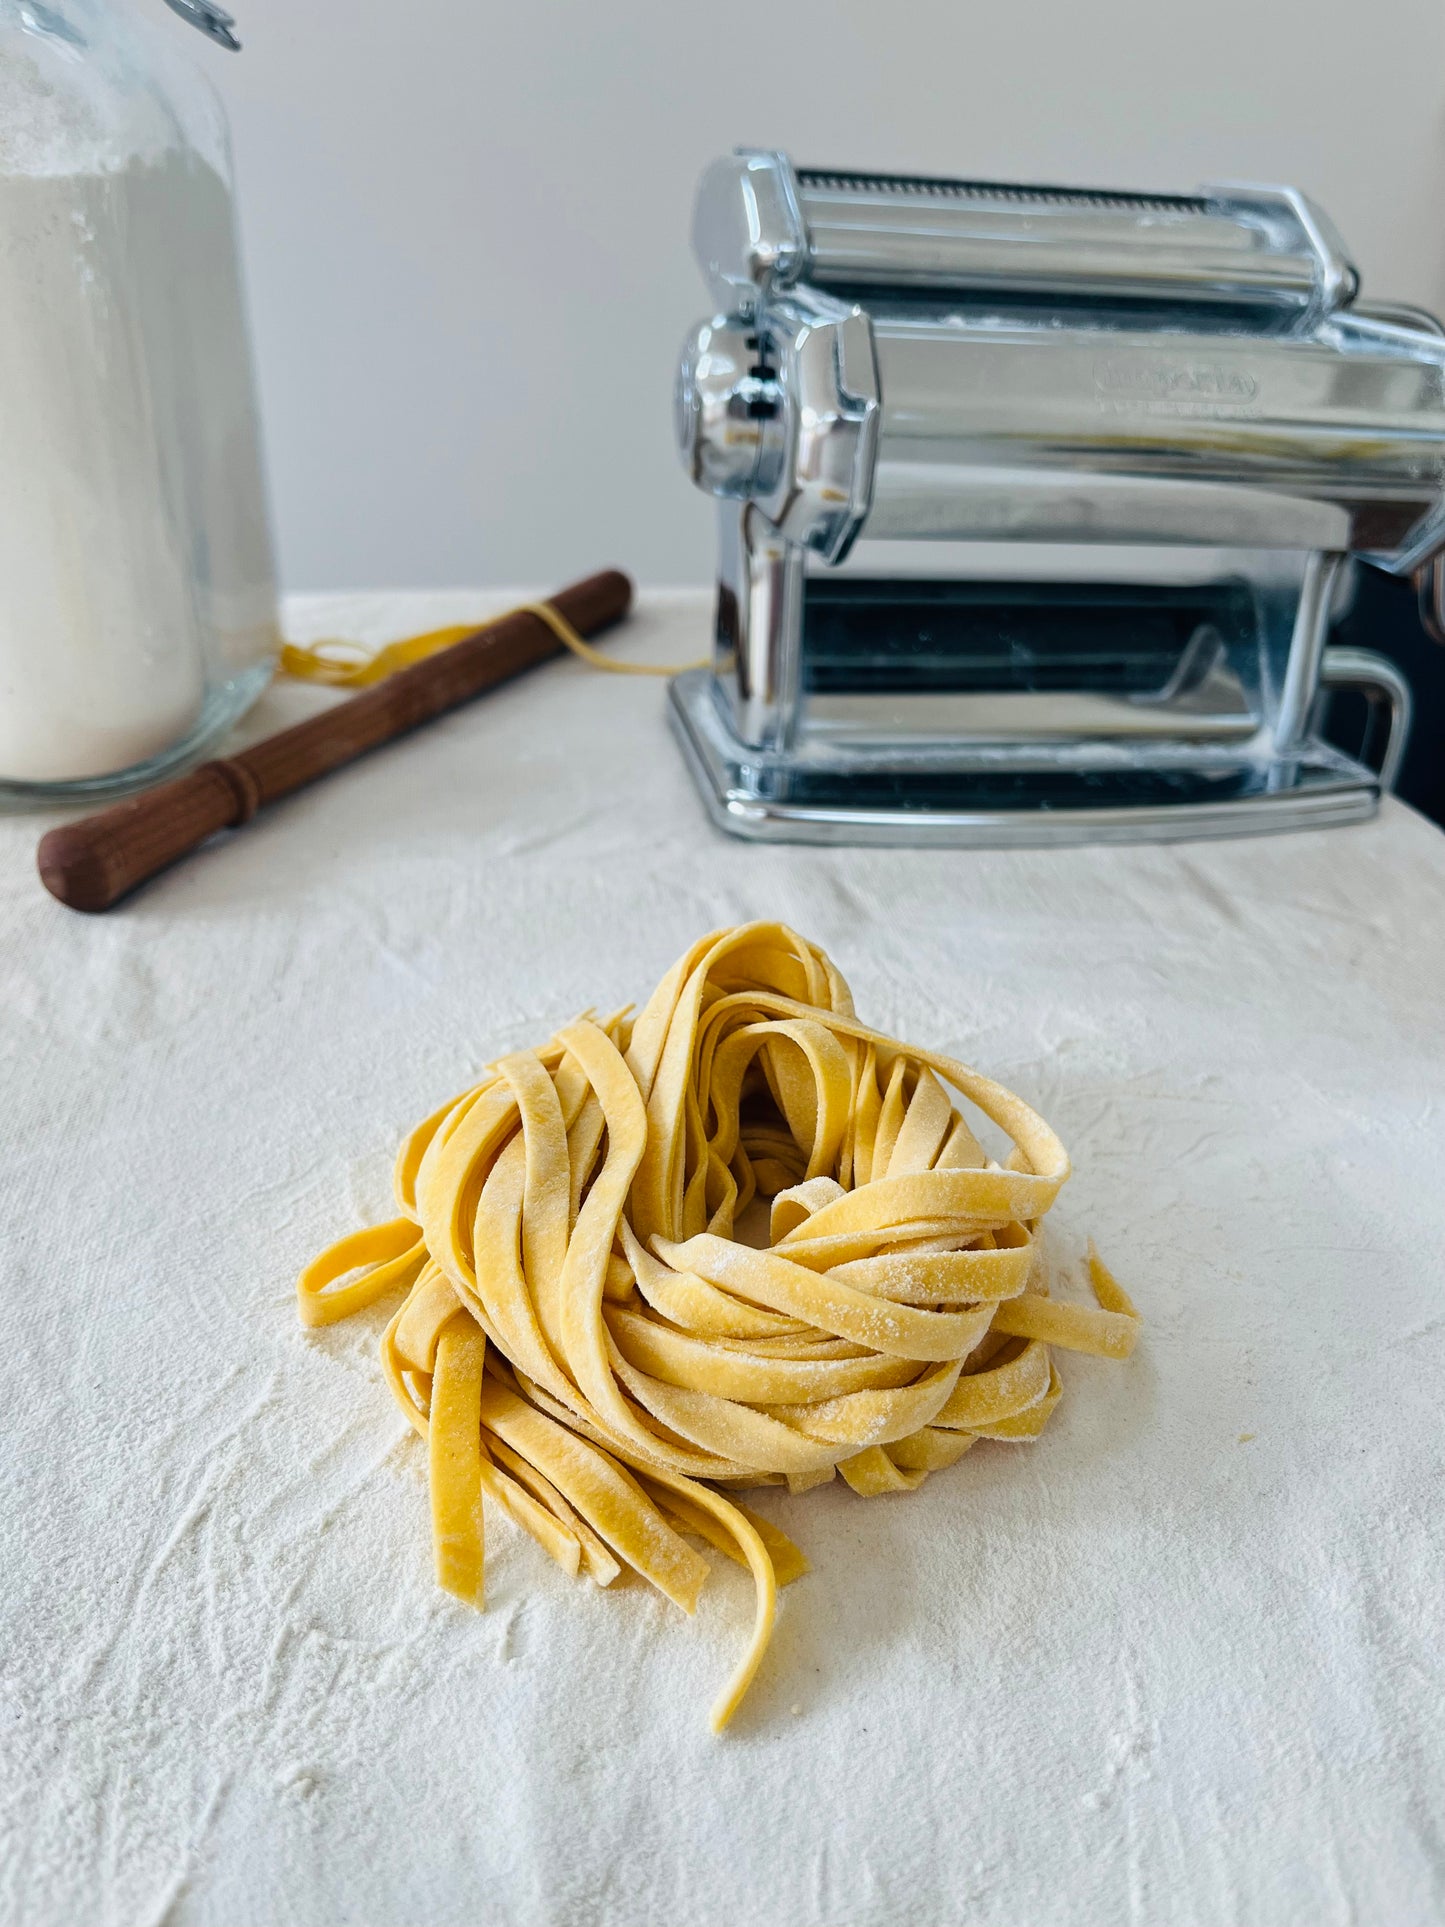 Pasta Making Cloth | Cotton Canvas Cloth for Pasta Making